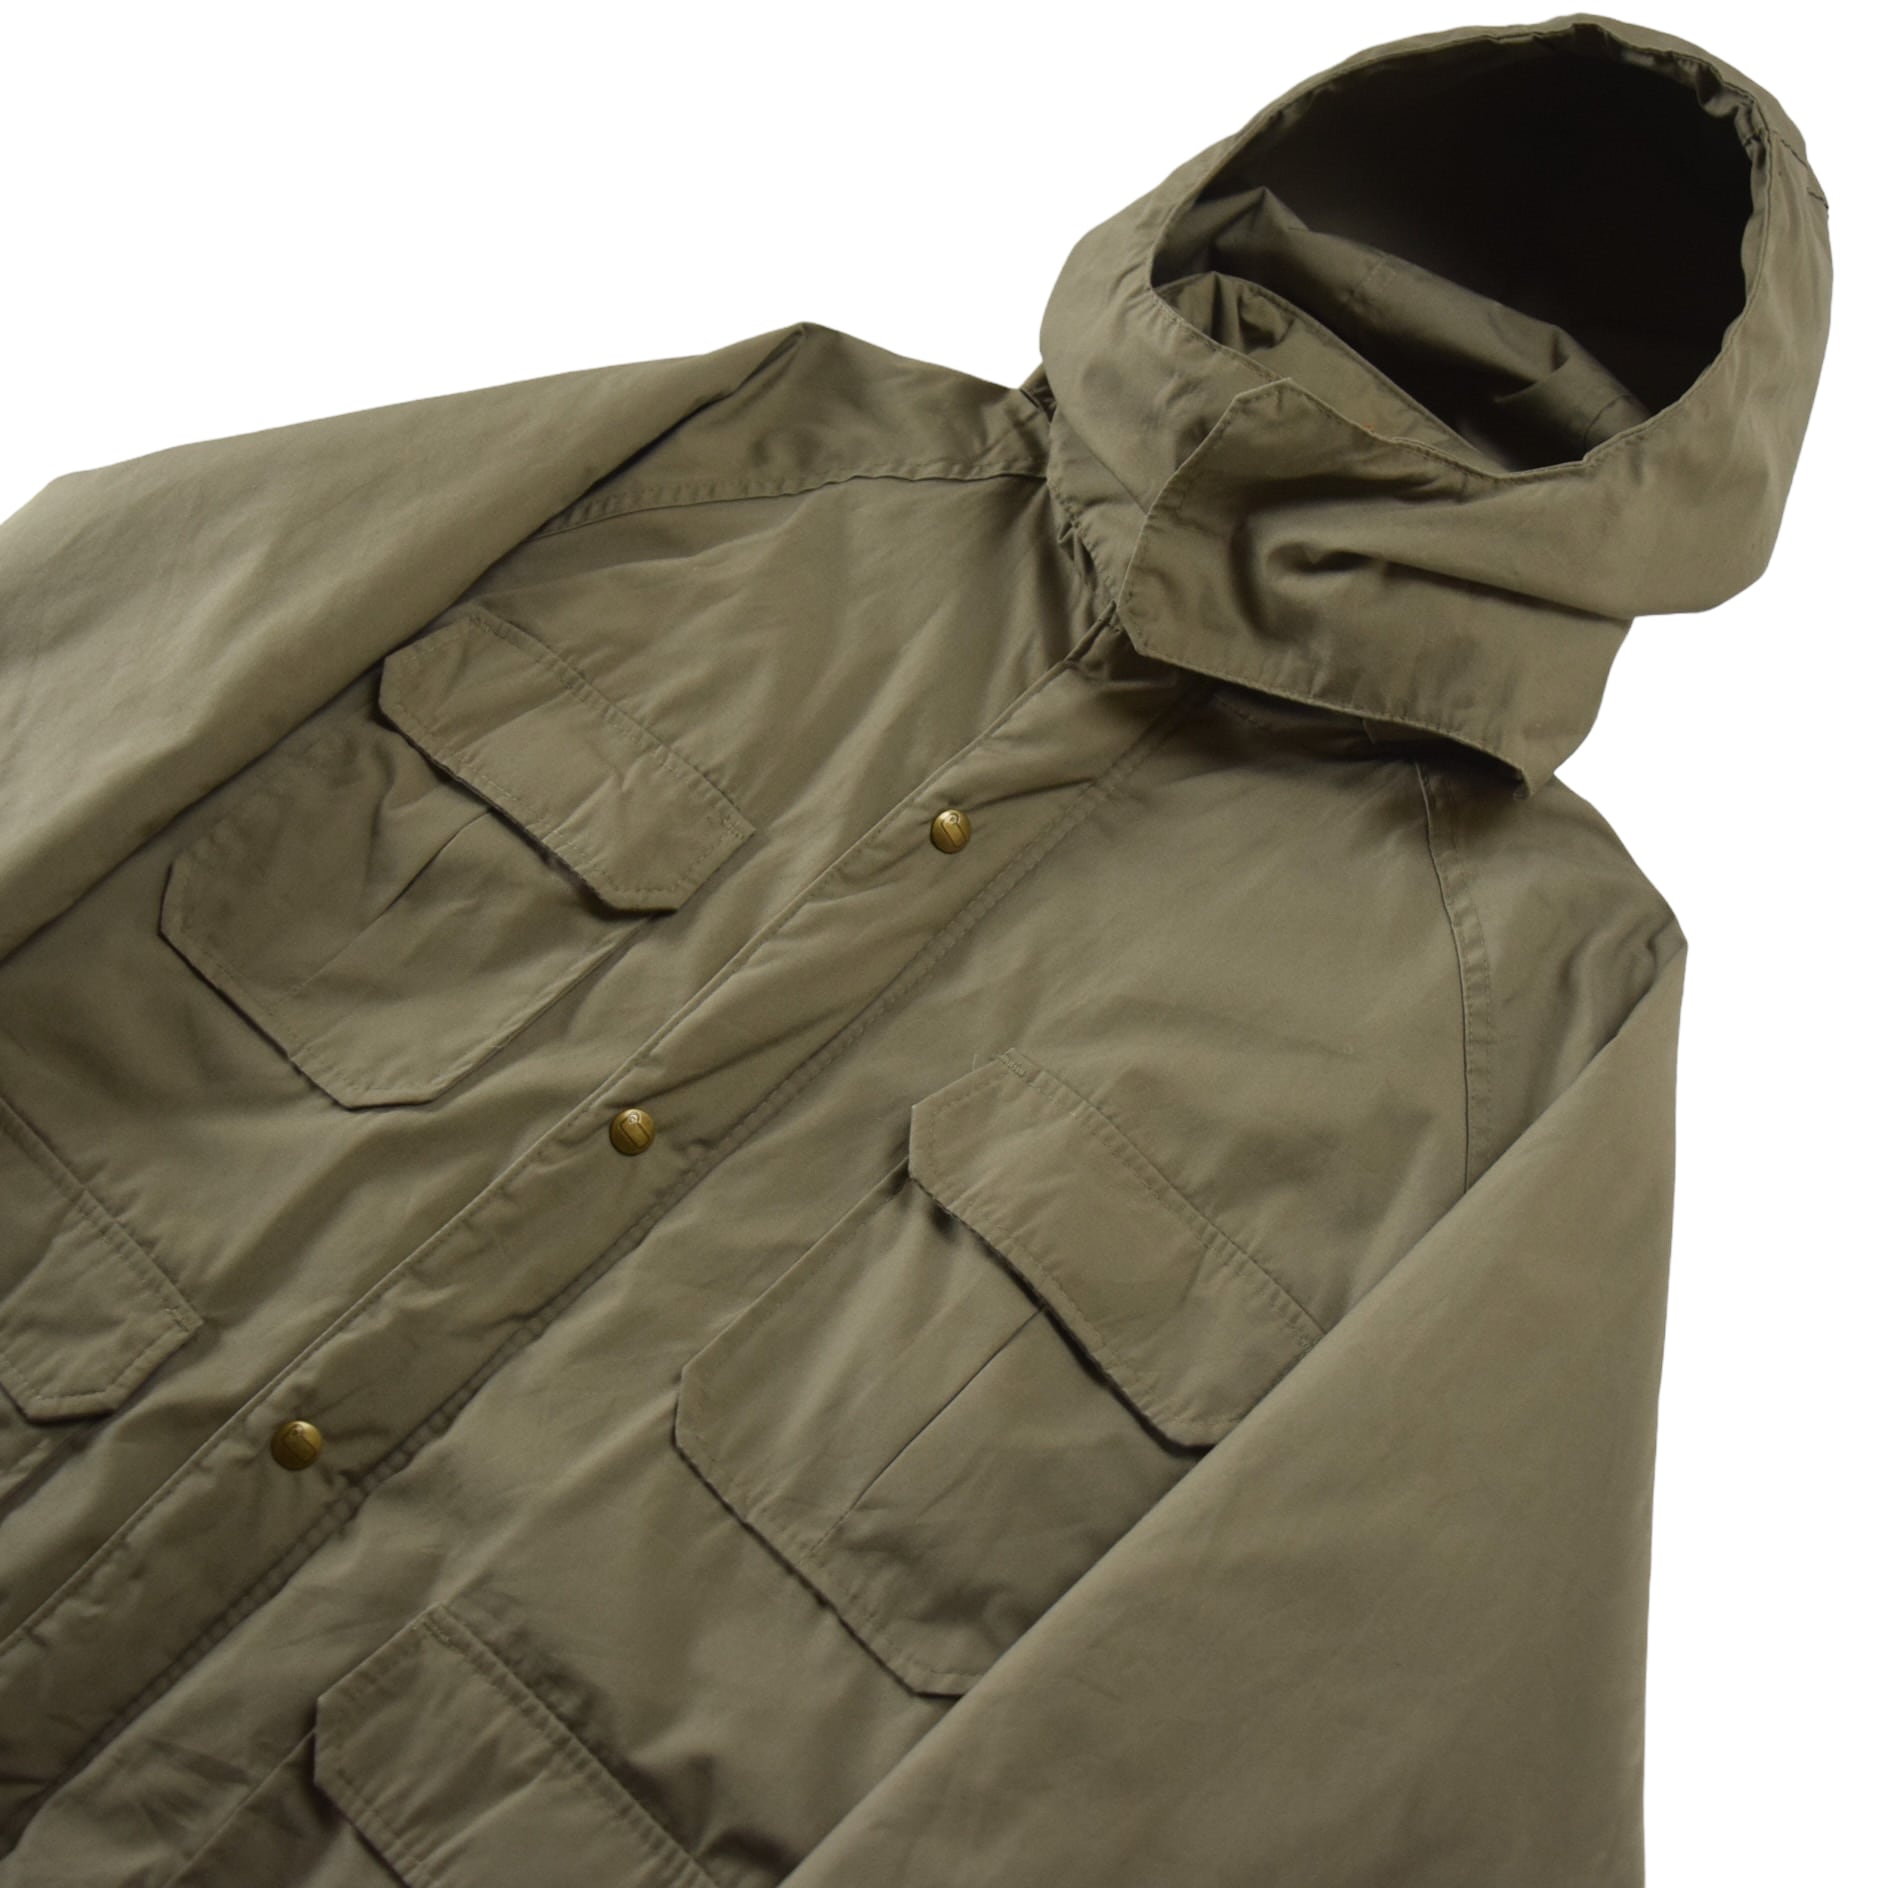 's   's "Woolrich" Vintage Mountain Parka With Hood Made